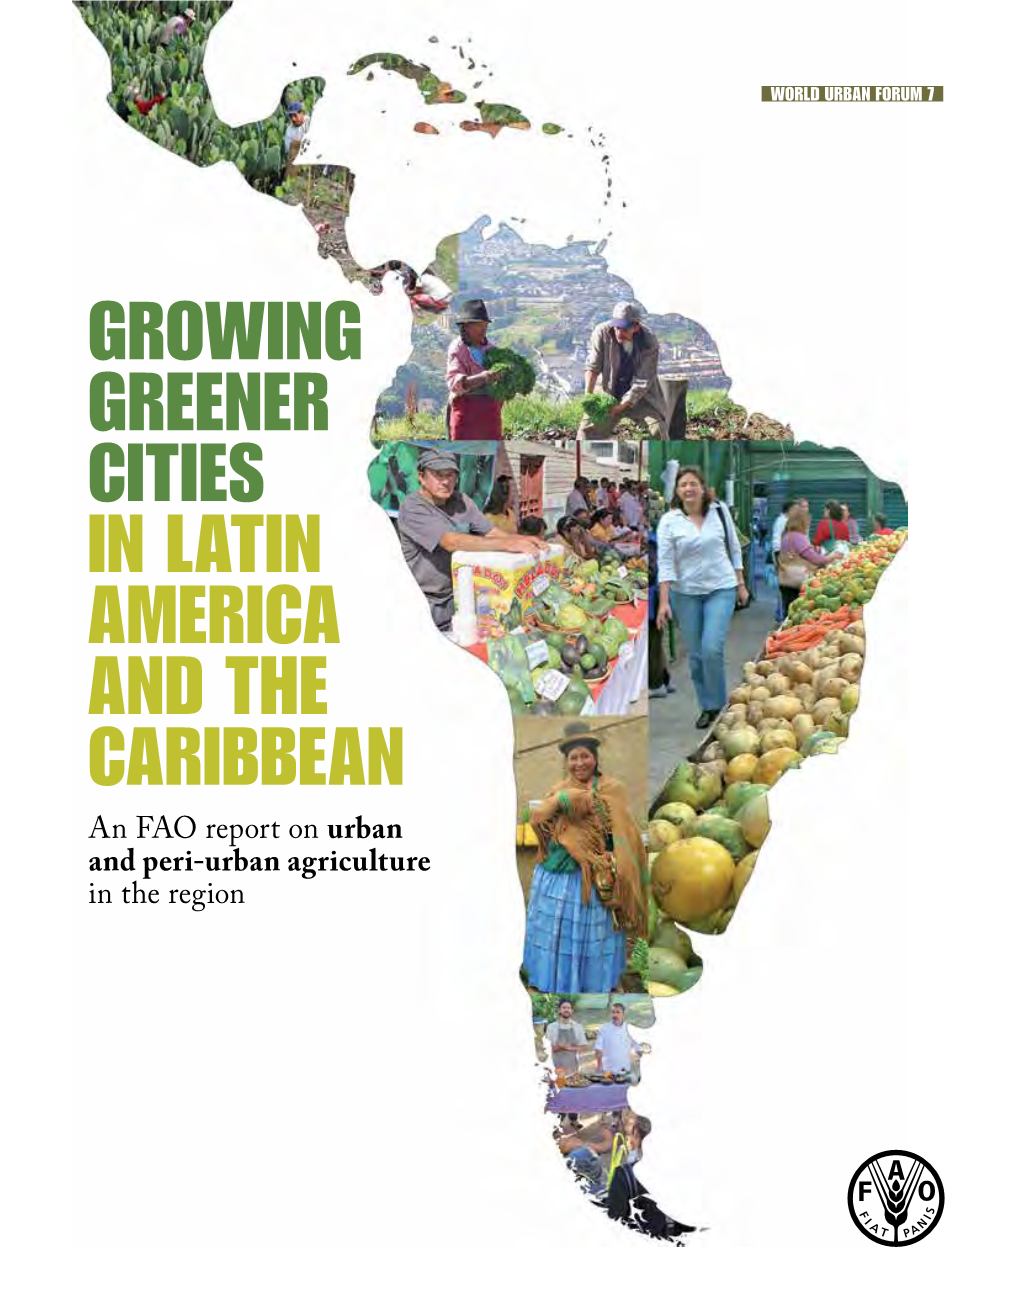 GROWING GREENER CITIES in LATIN AMERICA and the CARIBBEAN an FAO Report on Urban and Peri-Urban Agriculture in the Region